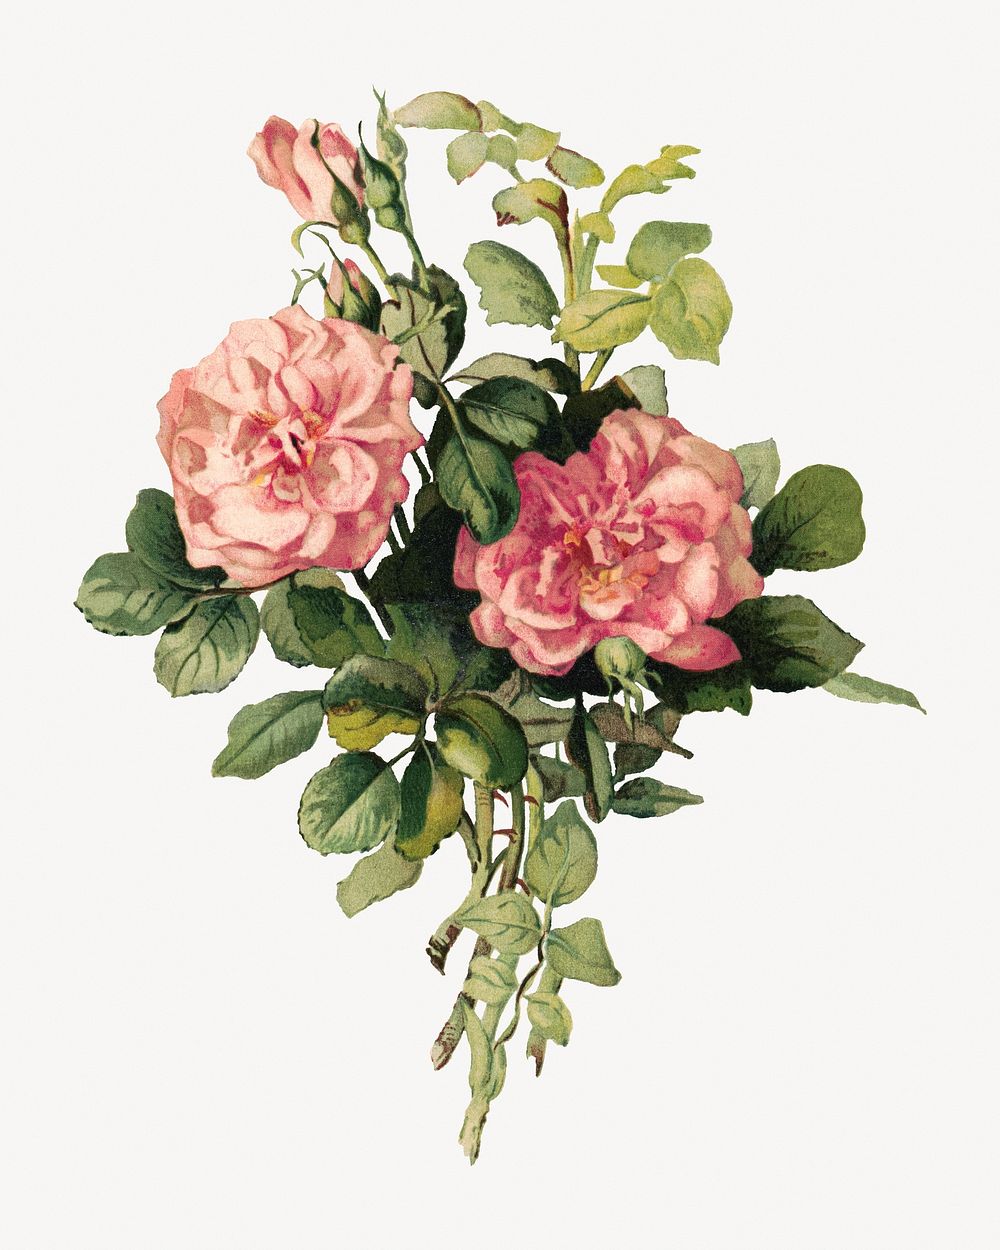 Aesthetic blush roses illustration.  Remastered by rawpixel